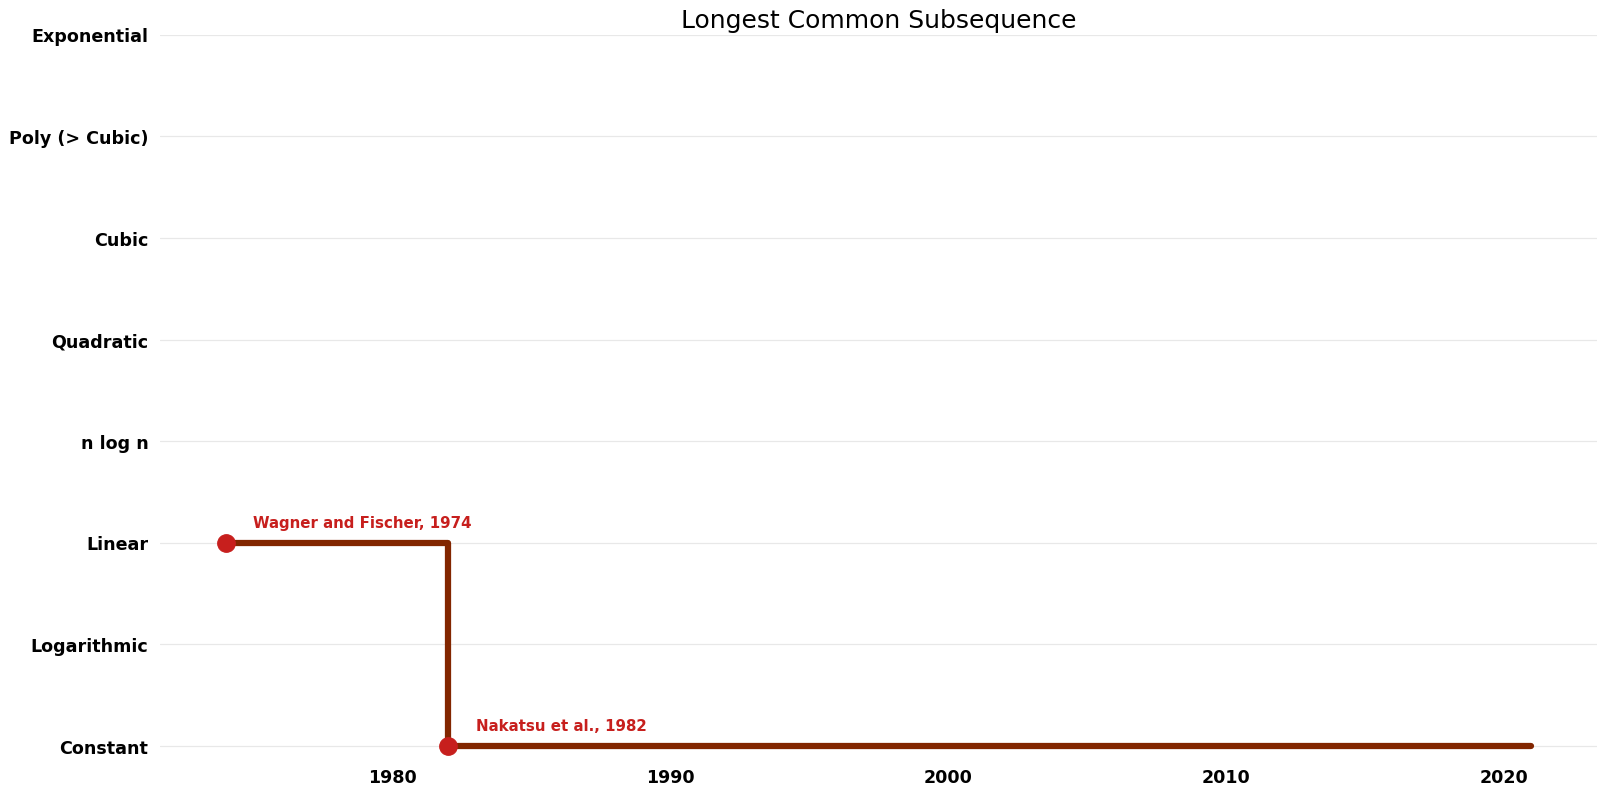 File:Longest Common Subsequence - Space.png